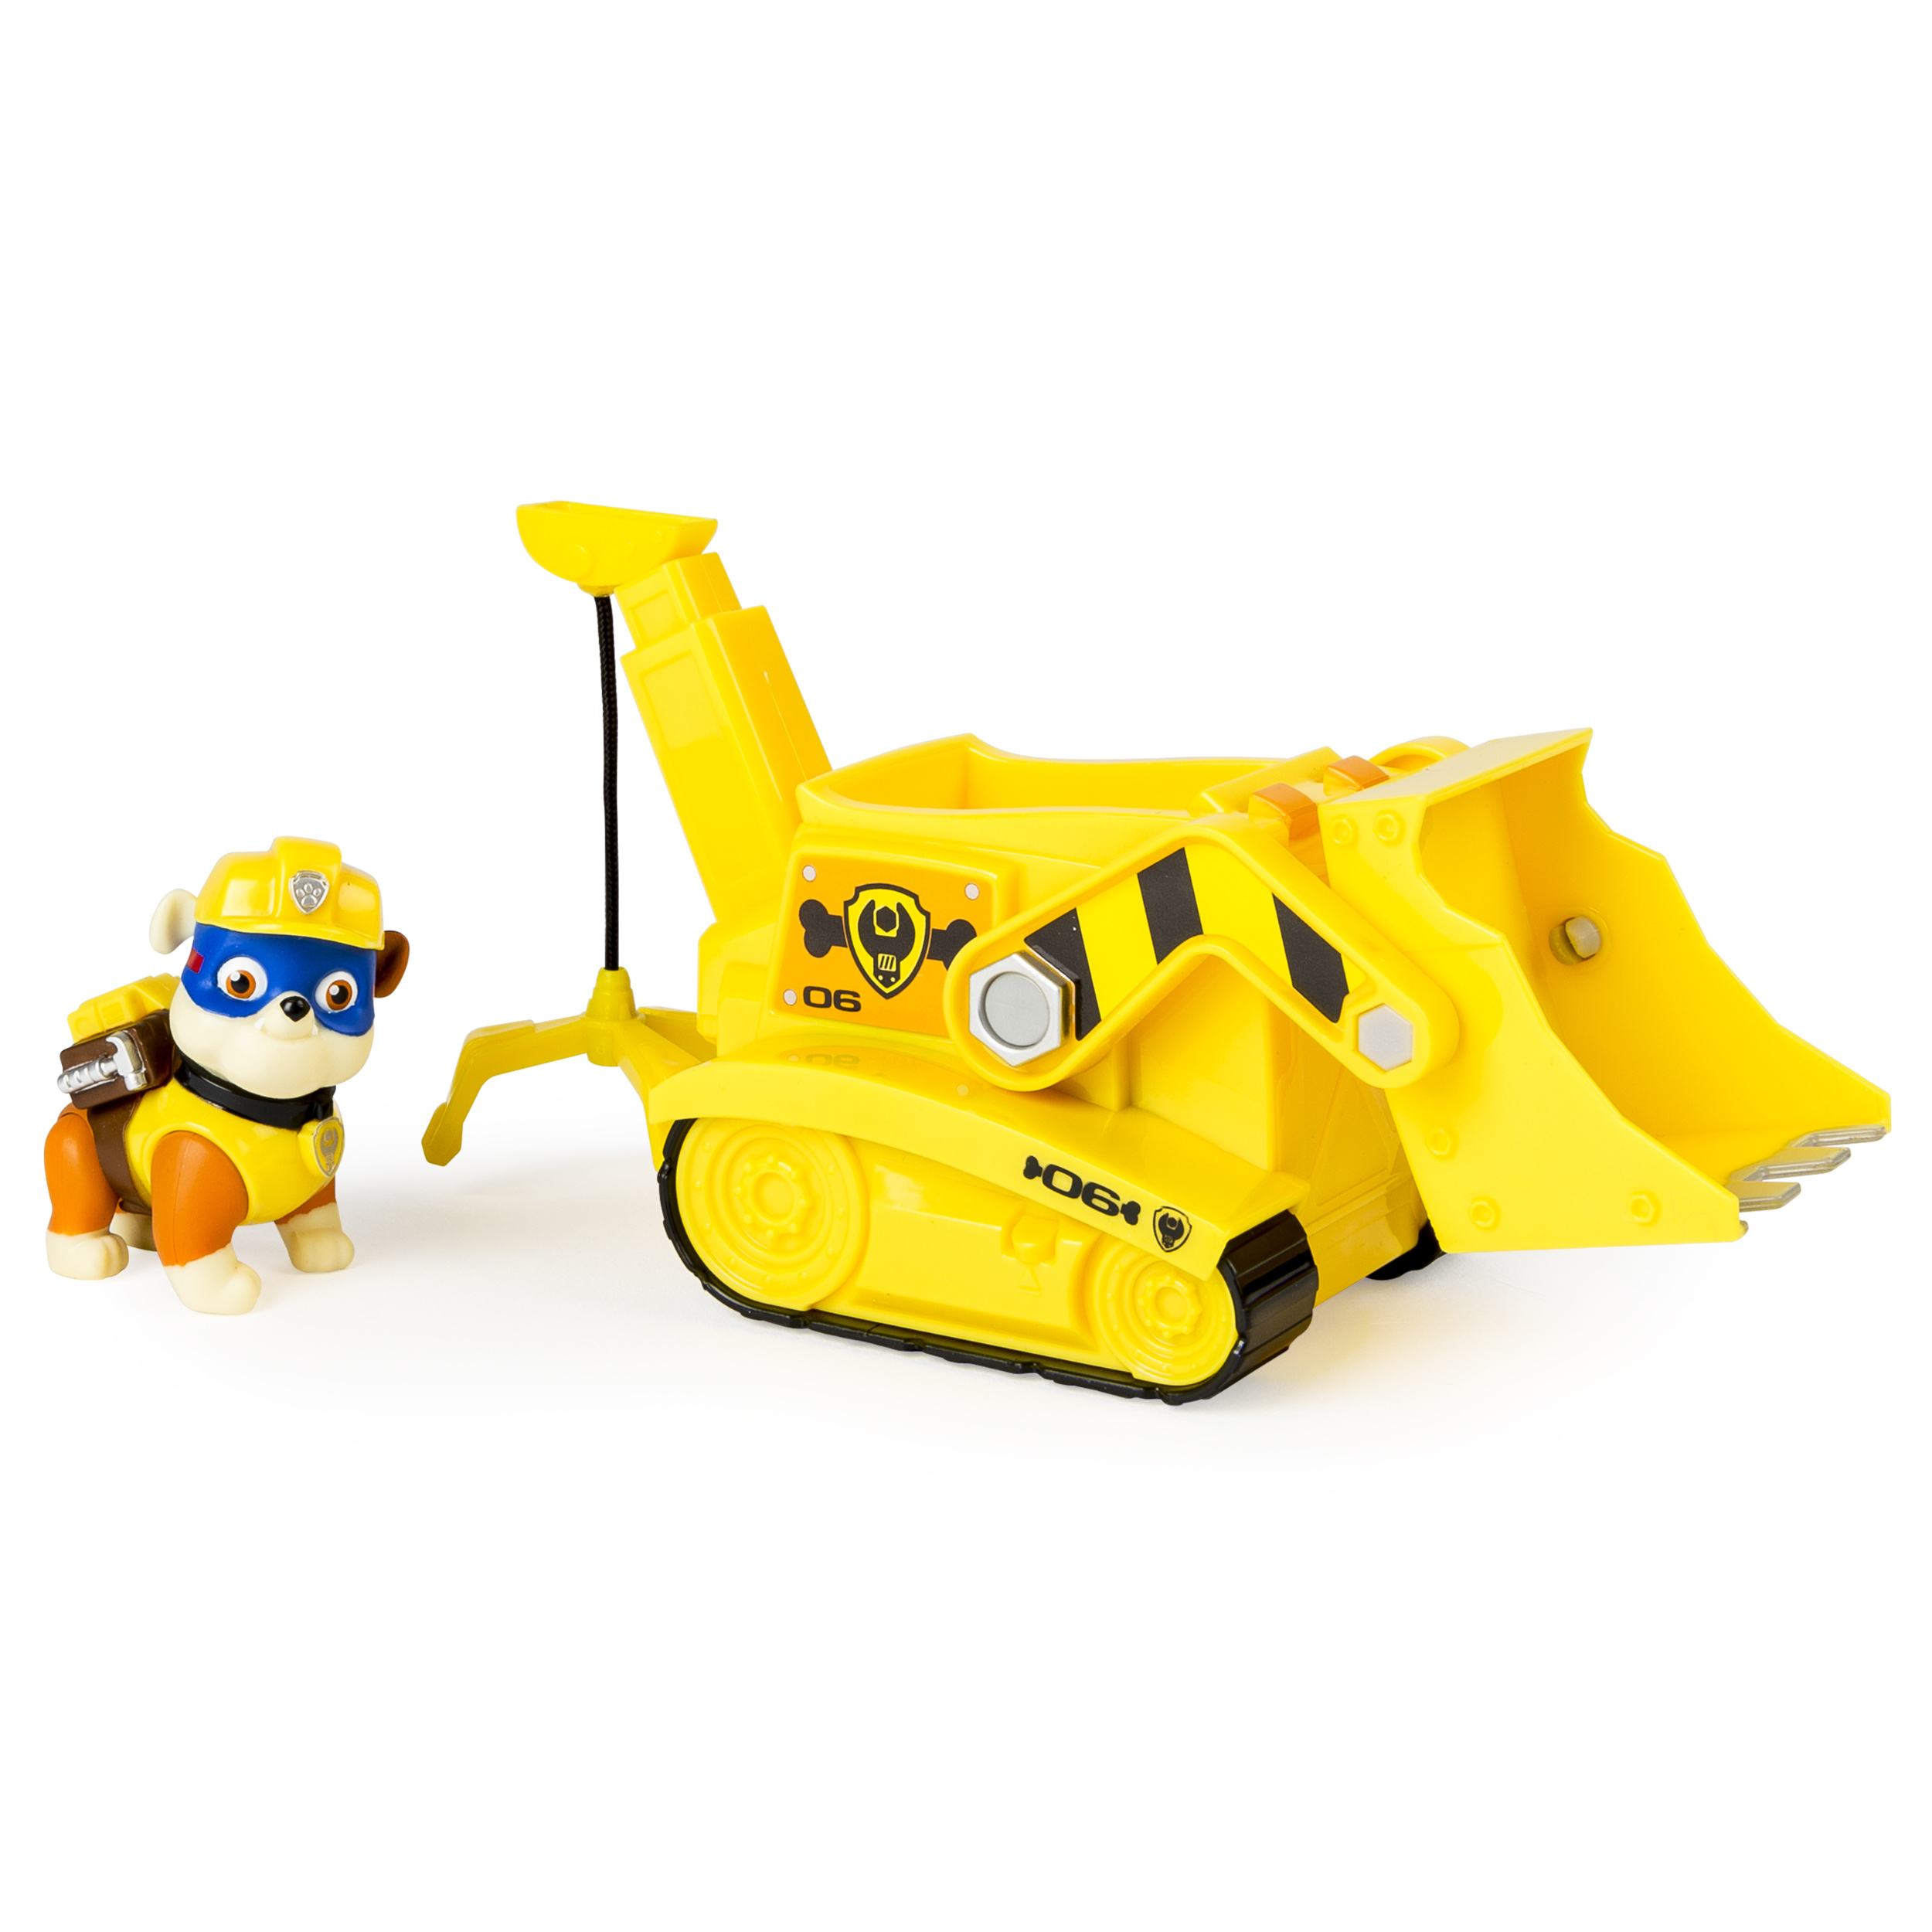 Paw Patrol Super Pup Rubble's Crane, Vehicle and Figure - image 1 of 6